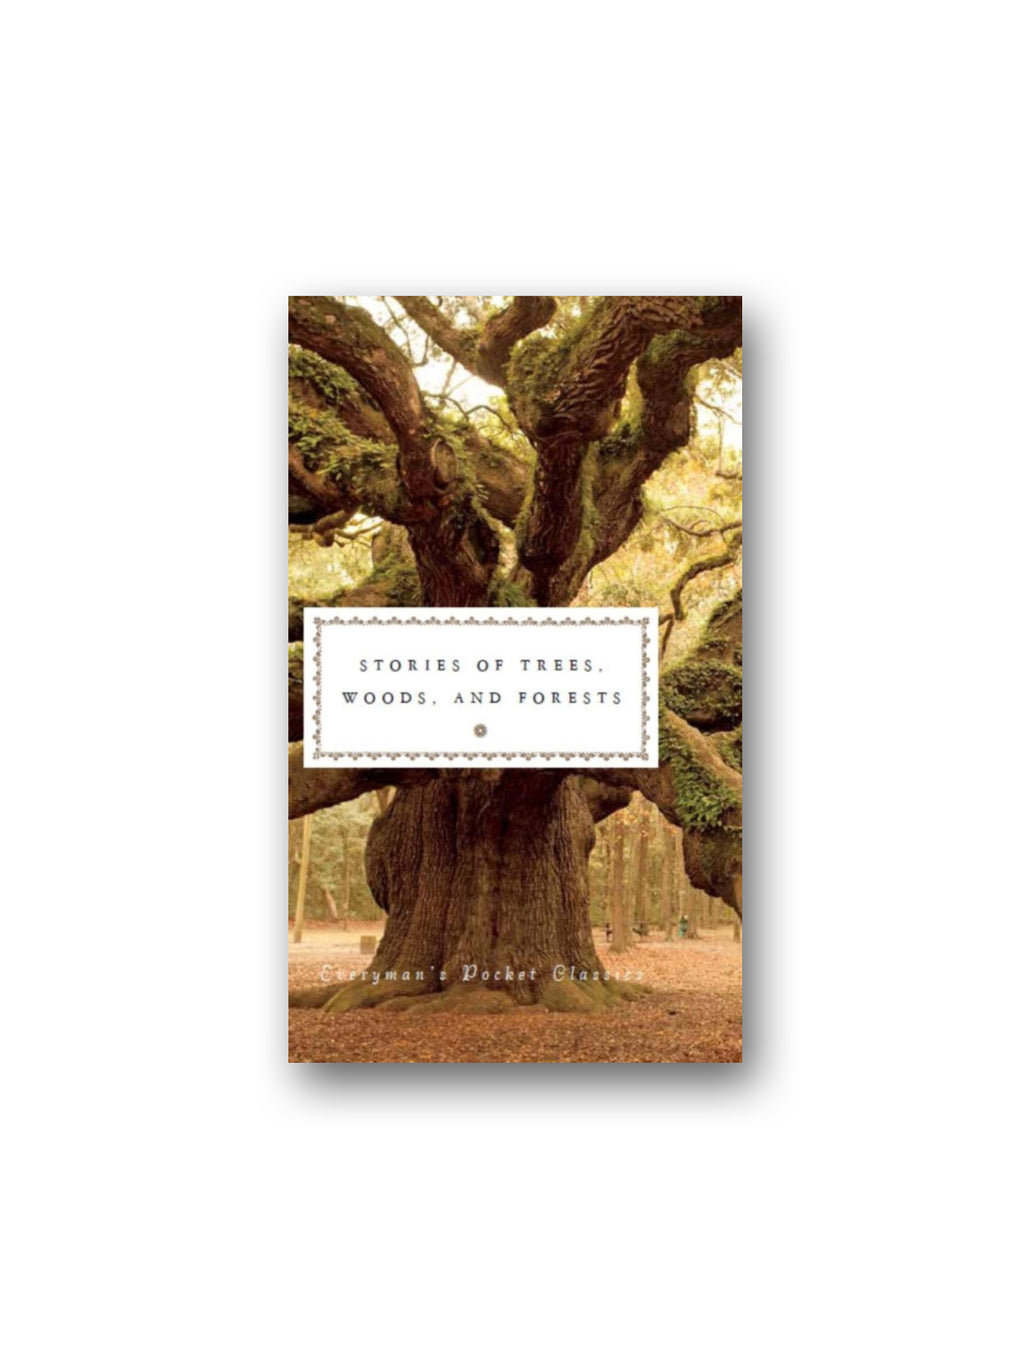 Stories of Trees, Woods, and Forests - Everyman's Library Pocket Classics